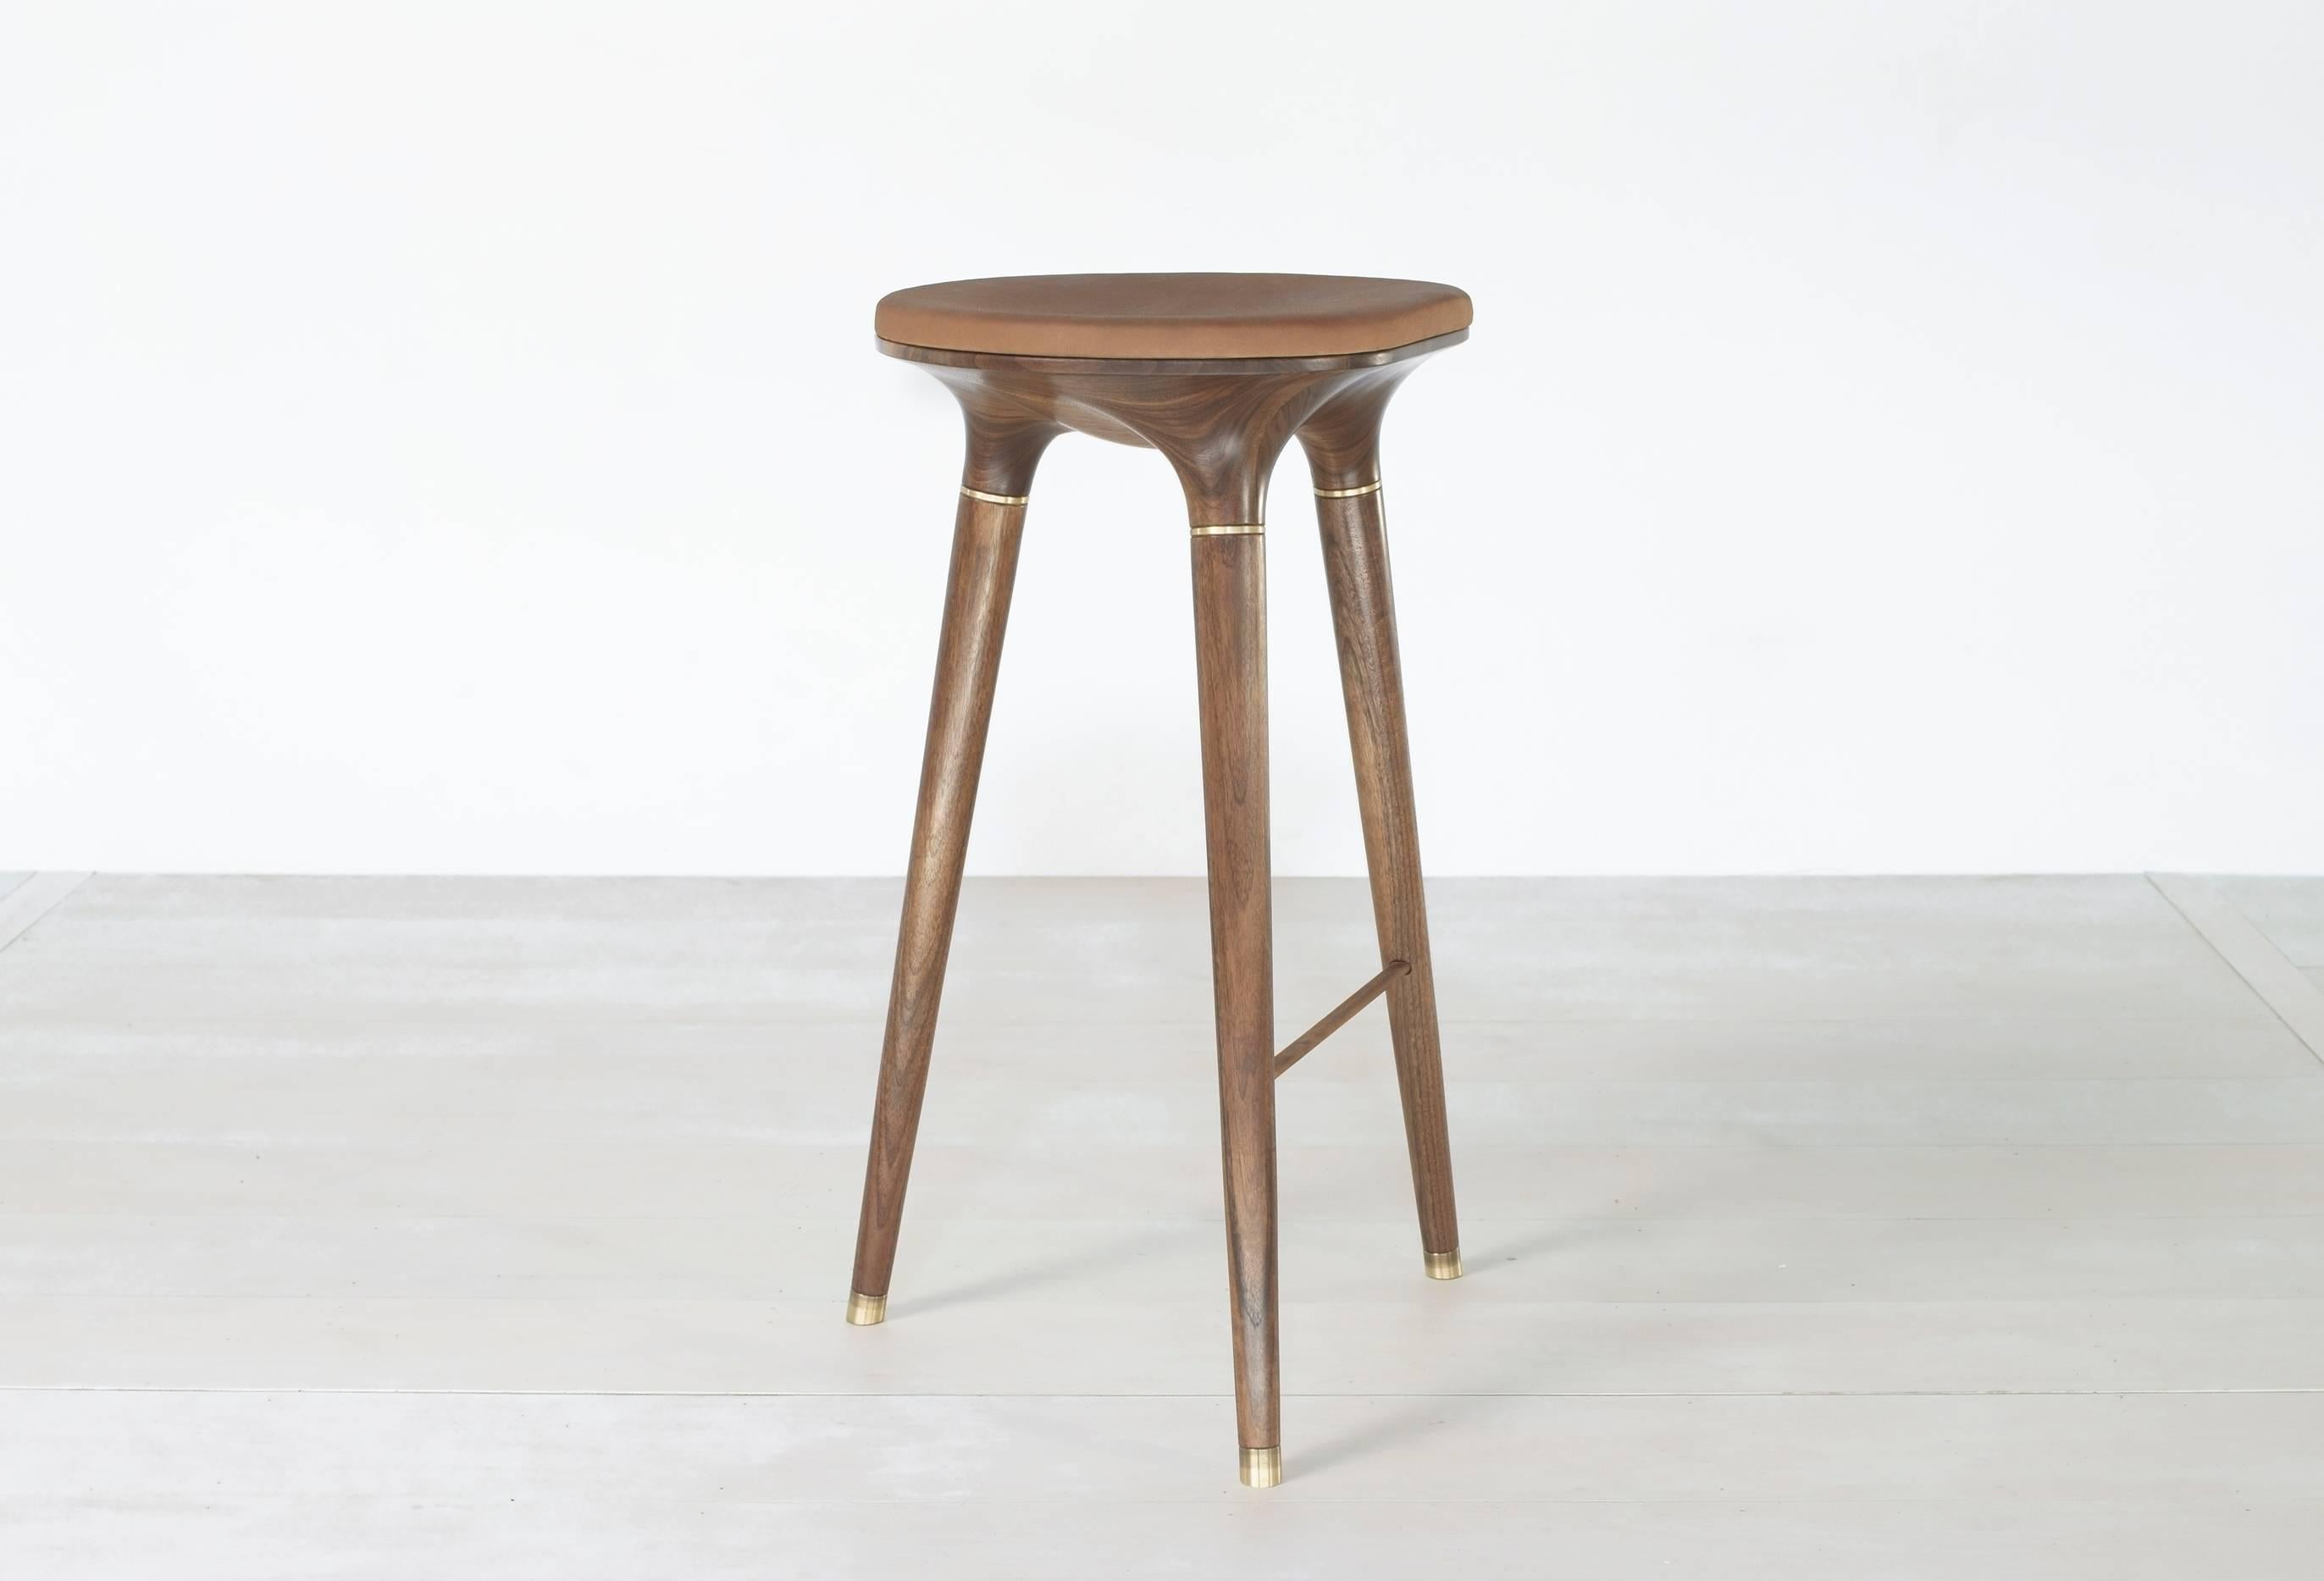 Natural finish Stool001 from series 001 by Vincent Pocsik.

Carved walnut stool with molded leather cushion top and brass accents. Shown here in a natural finish at bar height. 

Vincent Pocsik finds the balance between old and new fabrication